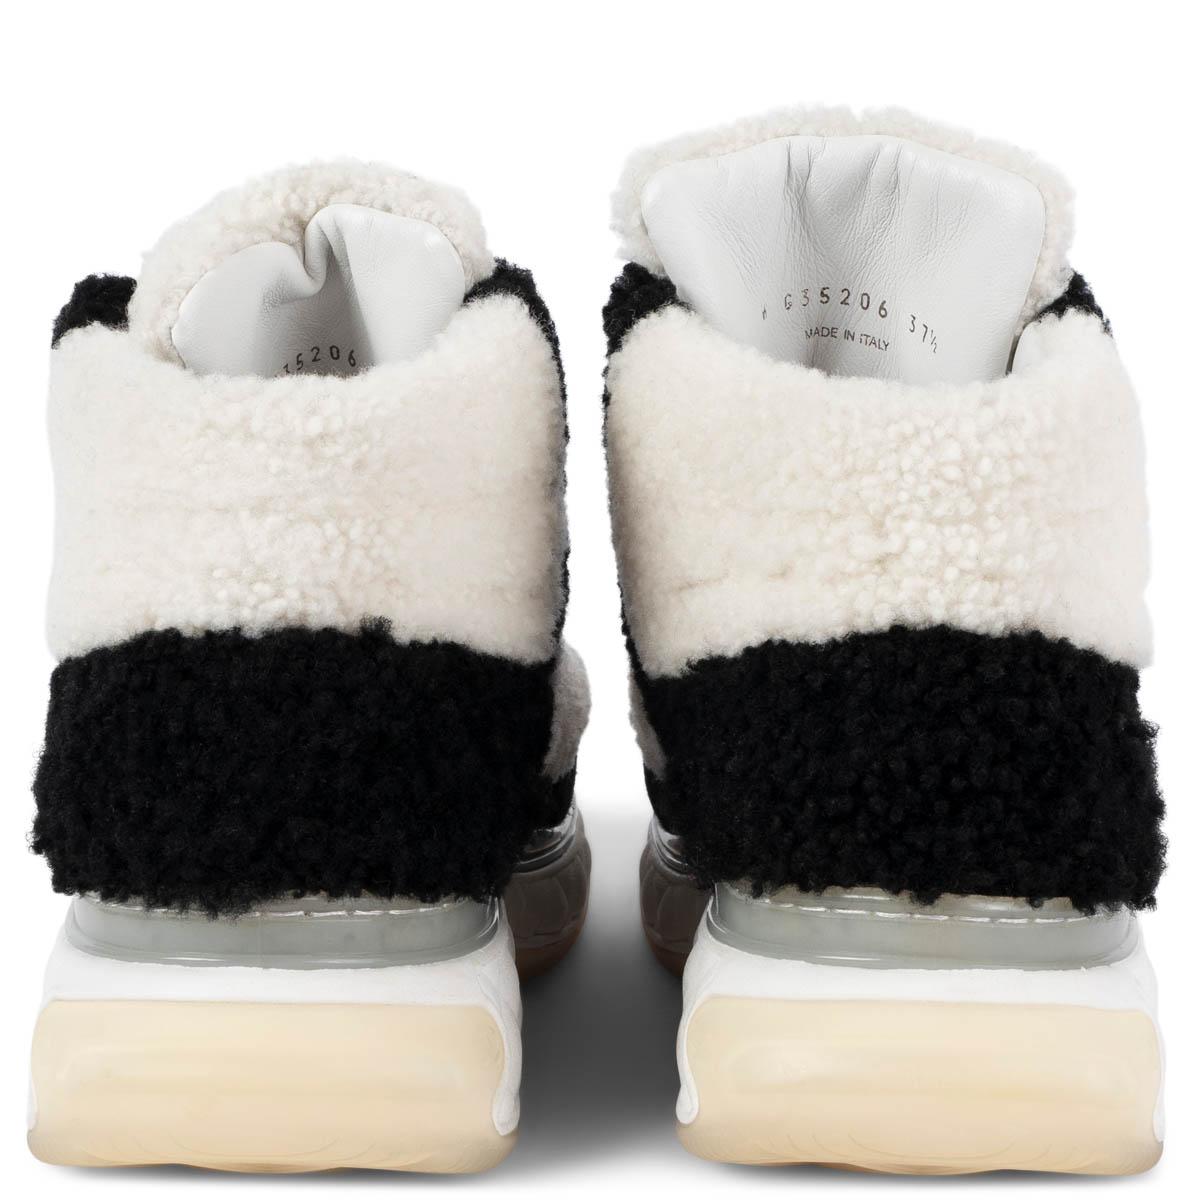 Gray CHANEL black & white 2019 19B SHEARLING Sneakers Shoes 37.5 For Sale